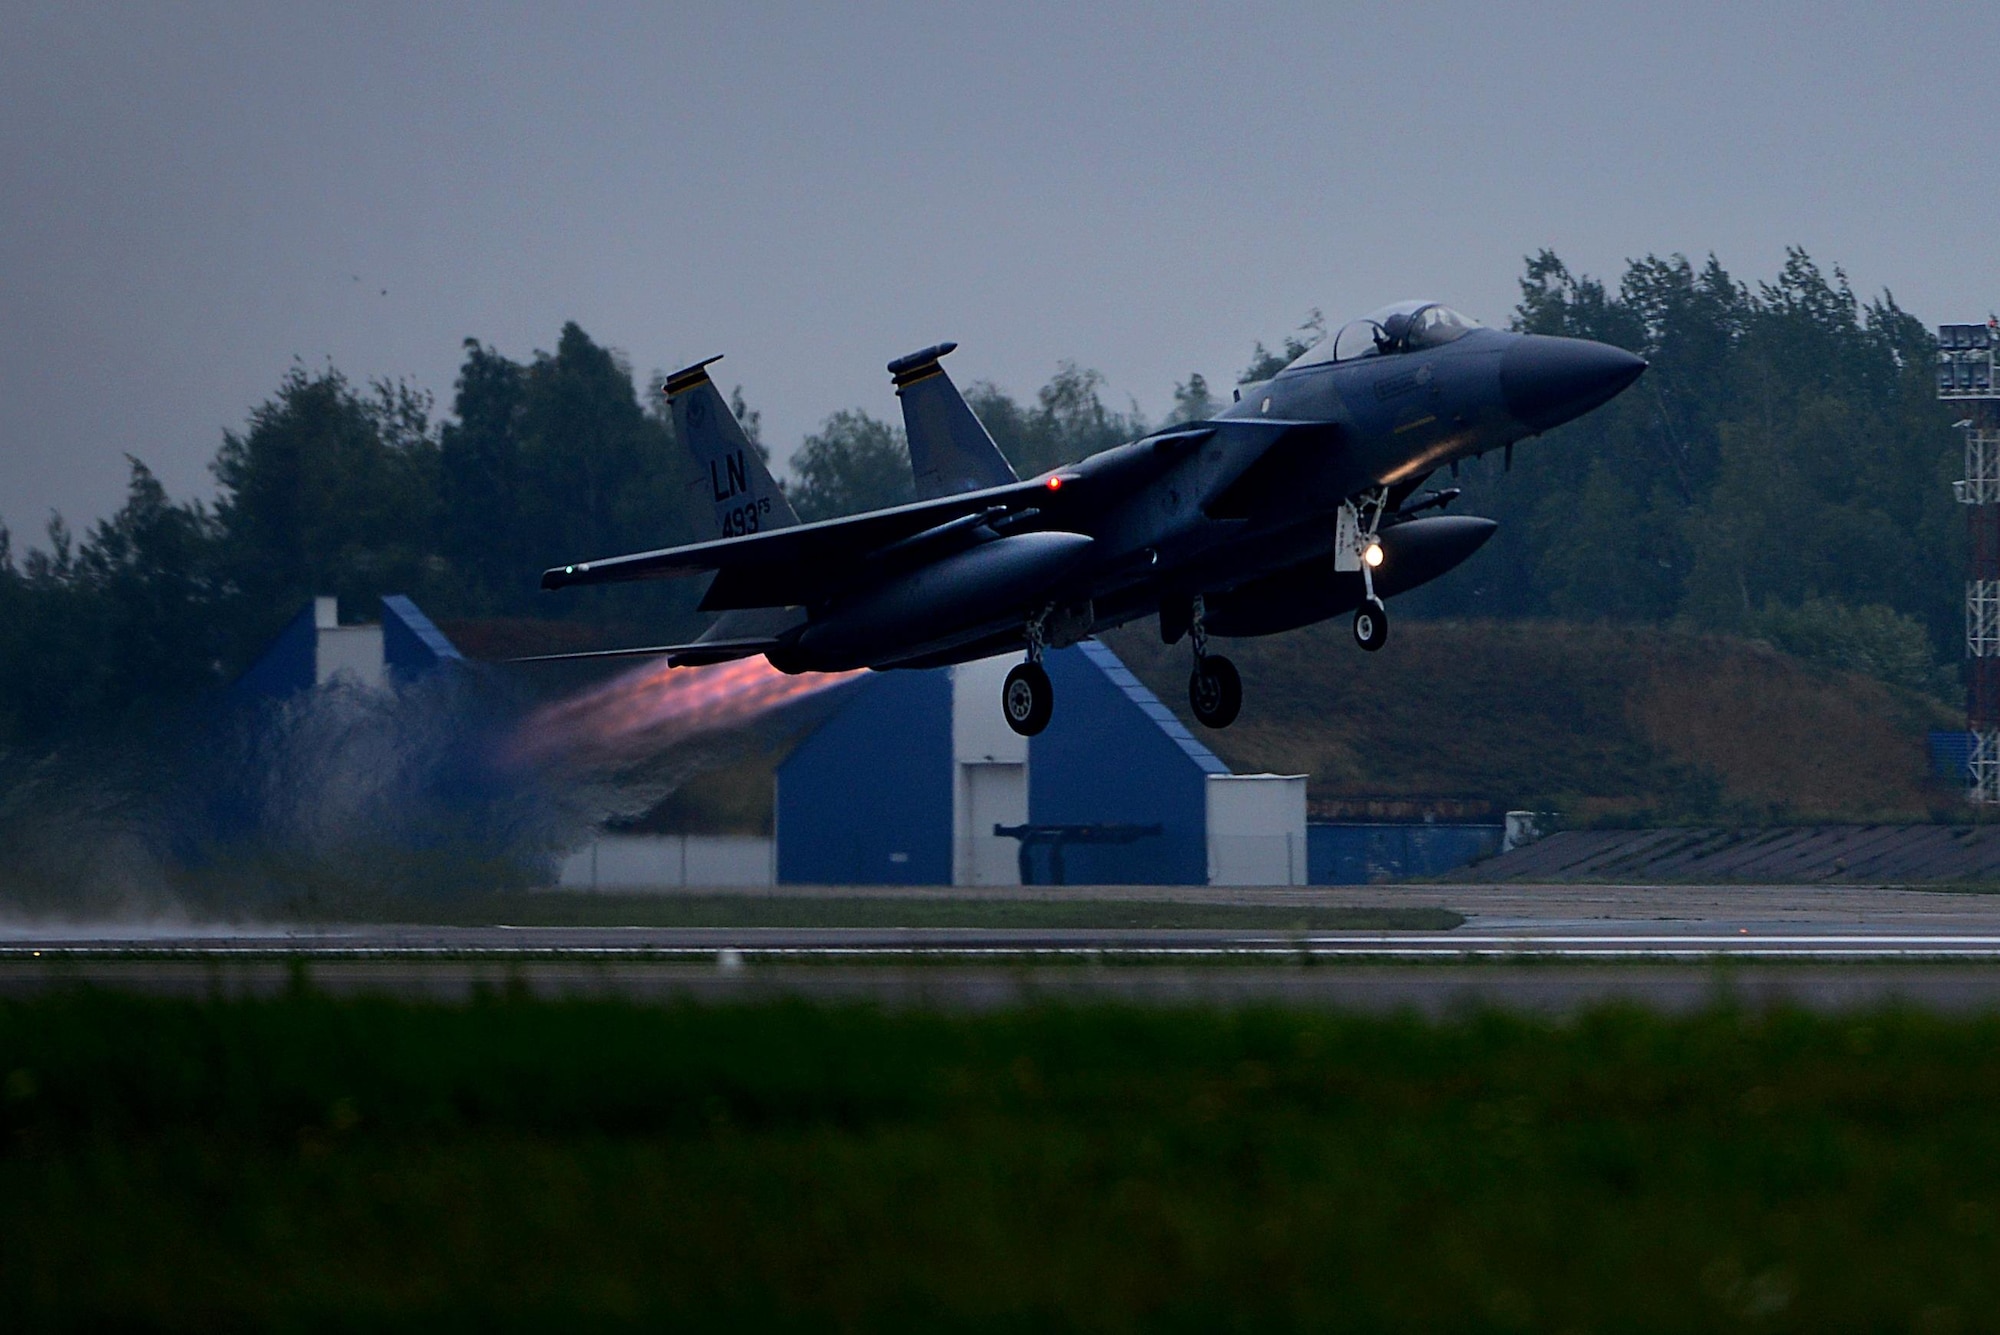 An alert ready F-15C Eagle from the 493rd Expeditionary Fighter Squadron respond to an alert scramble notification at Siauliai Air Base, Lithuania, Sept. 4, 2017. The F-15C is uniquely suited for the Baltic Air Policing mission with its capability to detect, acquire, track and intercept opposing aircraft while operating in friendly or rival-controlled airspace at distances beyond visual range down to close range, and at altitudes down to treetop level. (U.S. Air Force photo/ Tech. Sgt. Matthew Plew)